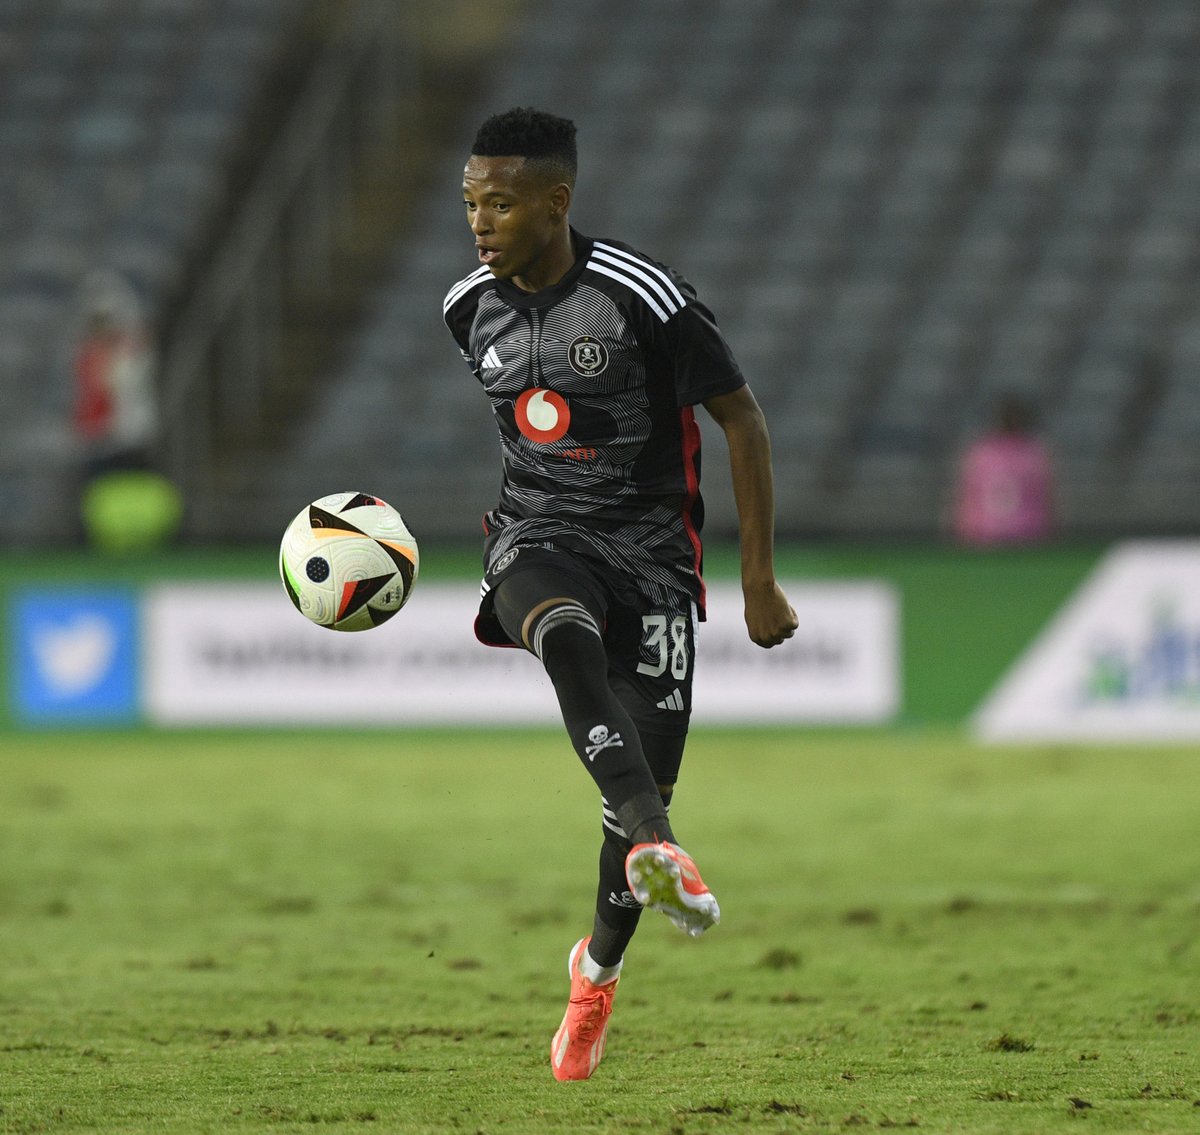 ⚽️ 4 goals 🅰️ 6 assists Relebohile Mofokeng has reached 10 goal contributions across all competitions in 2023/24. Diamond. 💎